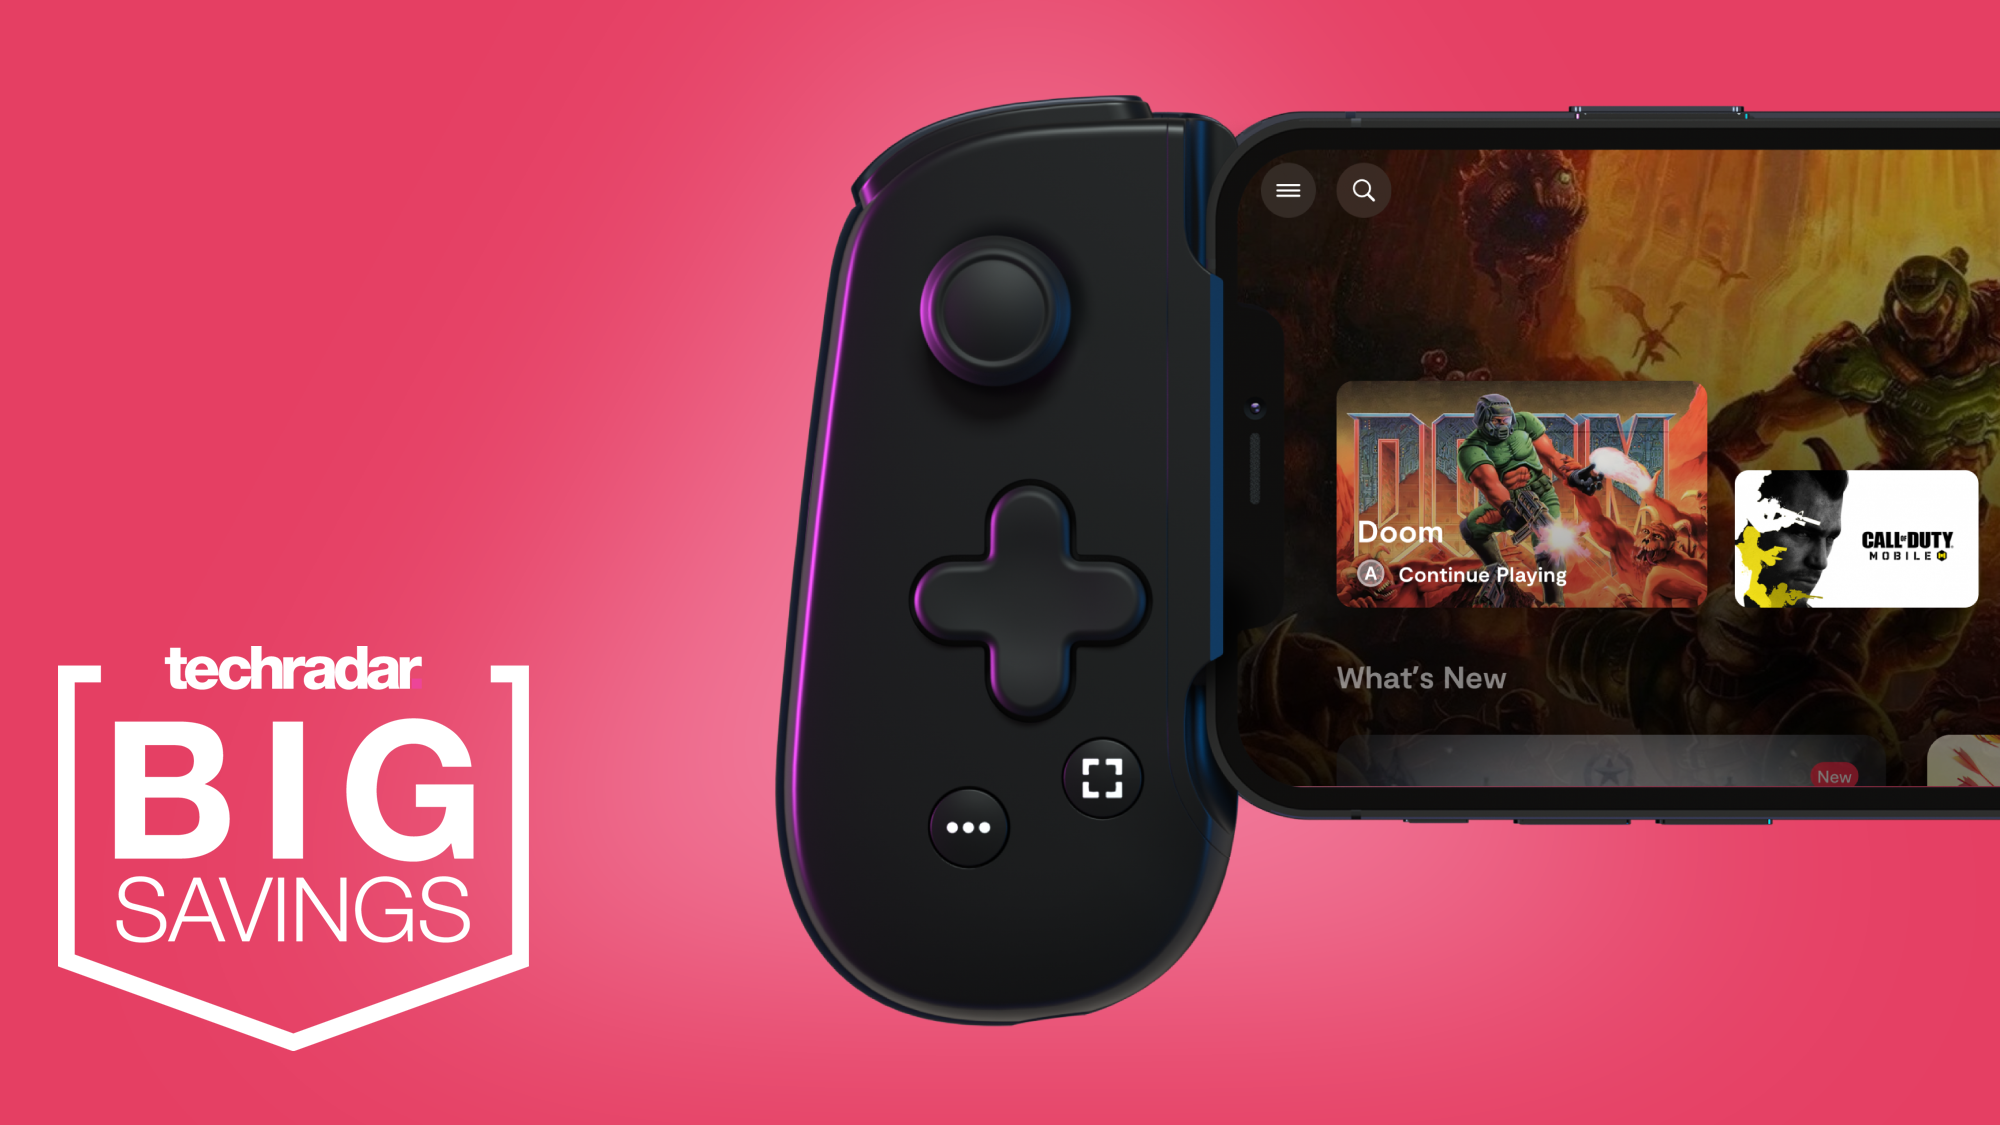 Level up your portable play this Prime Day with these excellent mobile  controller deals